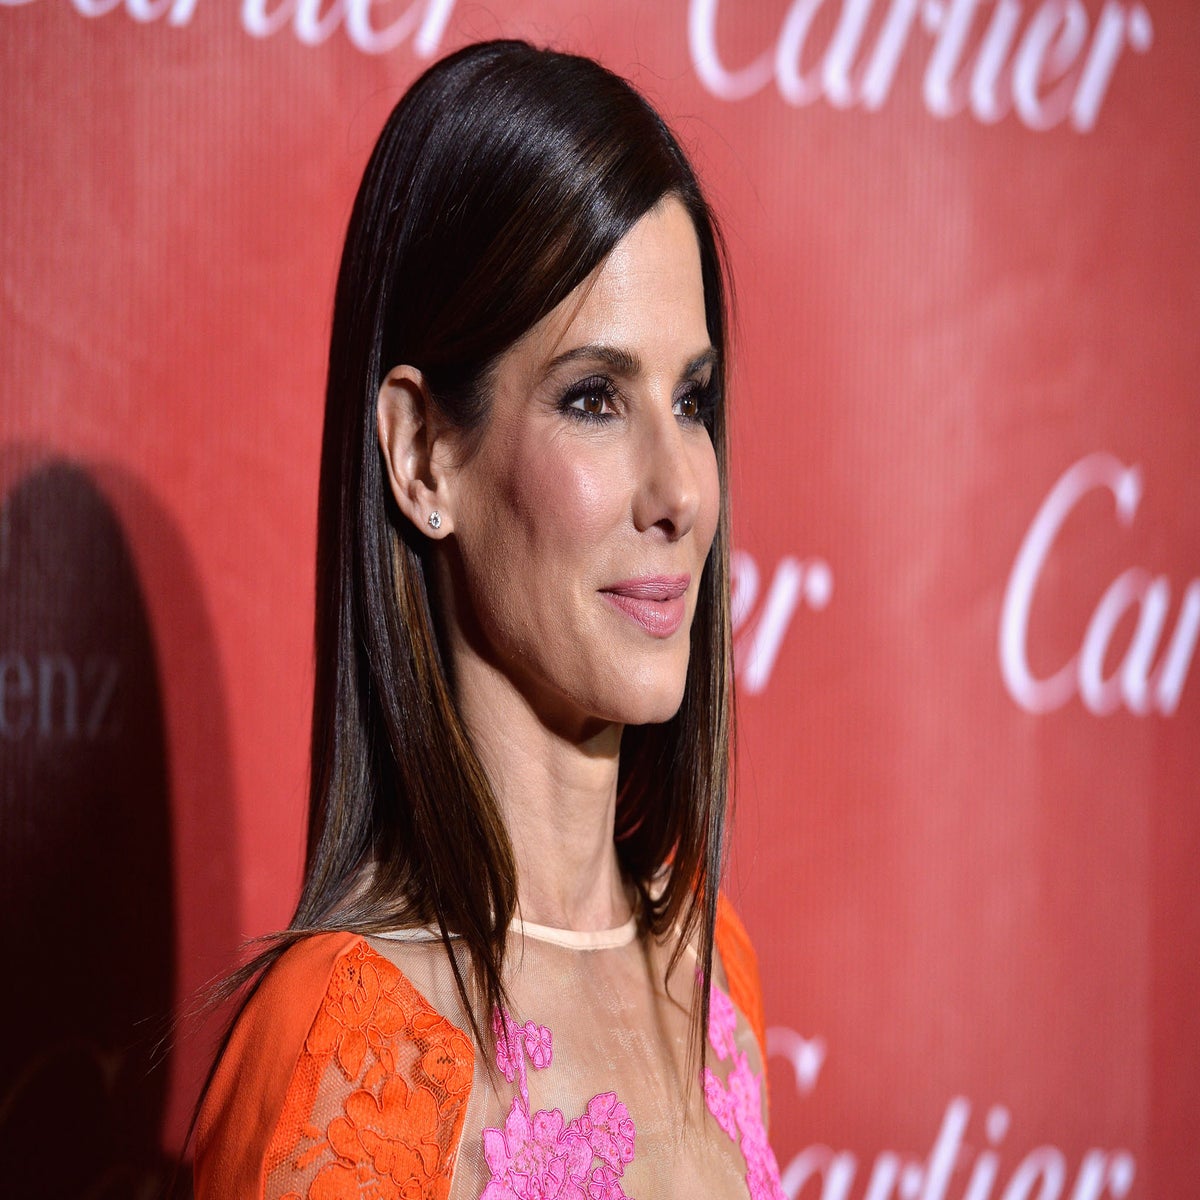 https://static.independent.co.uk/s3fs-public/thumbnails/image/2014/01/06/11/Sandra-Bullock-getty-v2.jpg?width=1200&height=1200&fit=crop